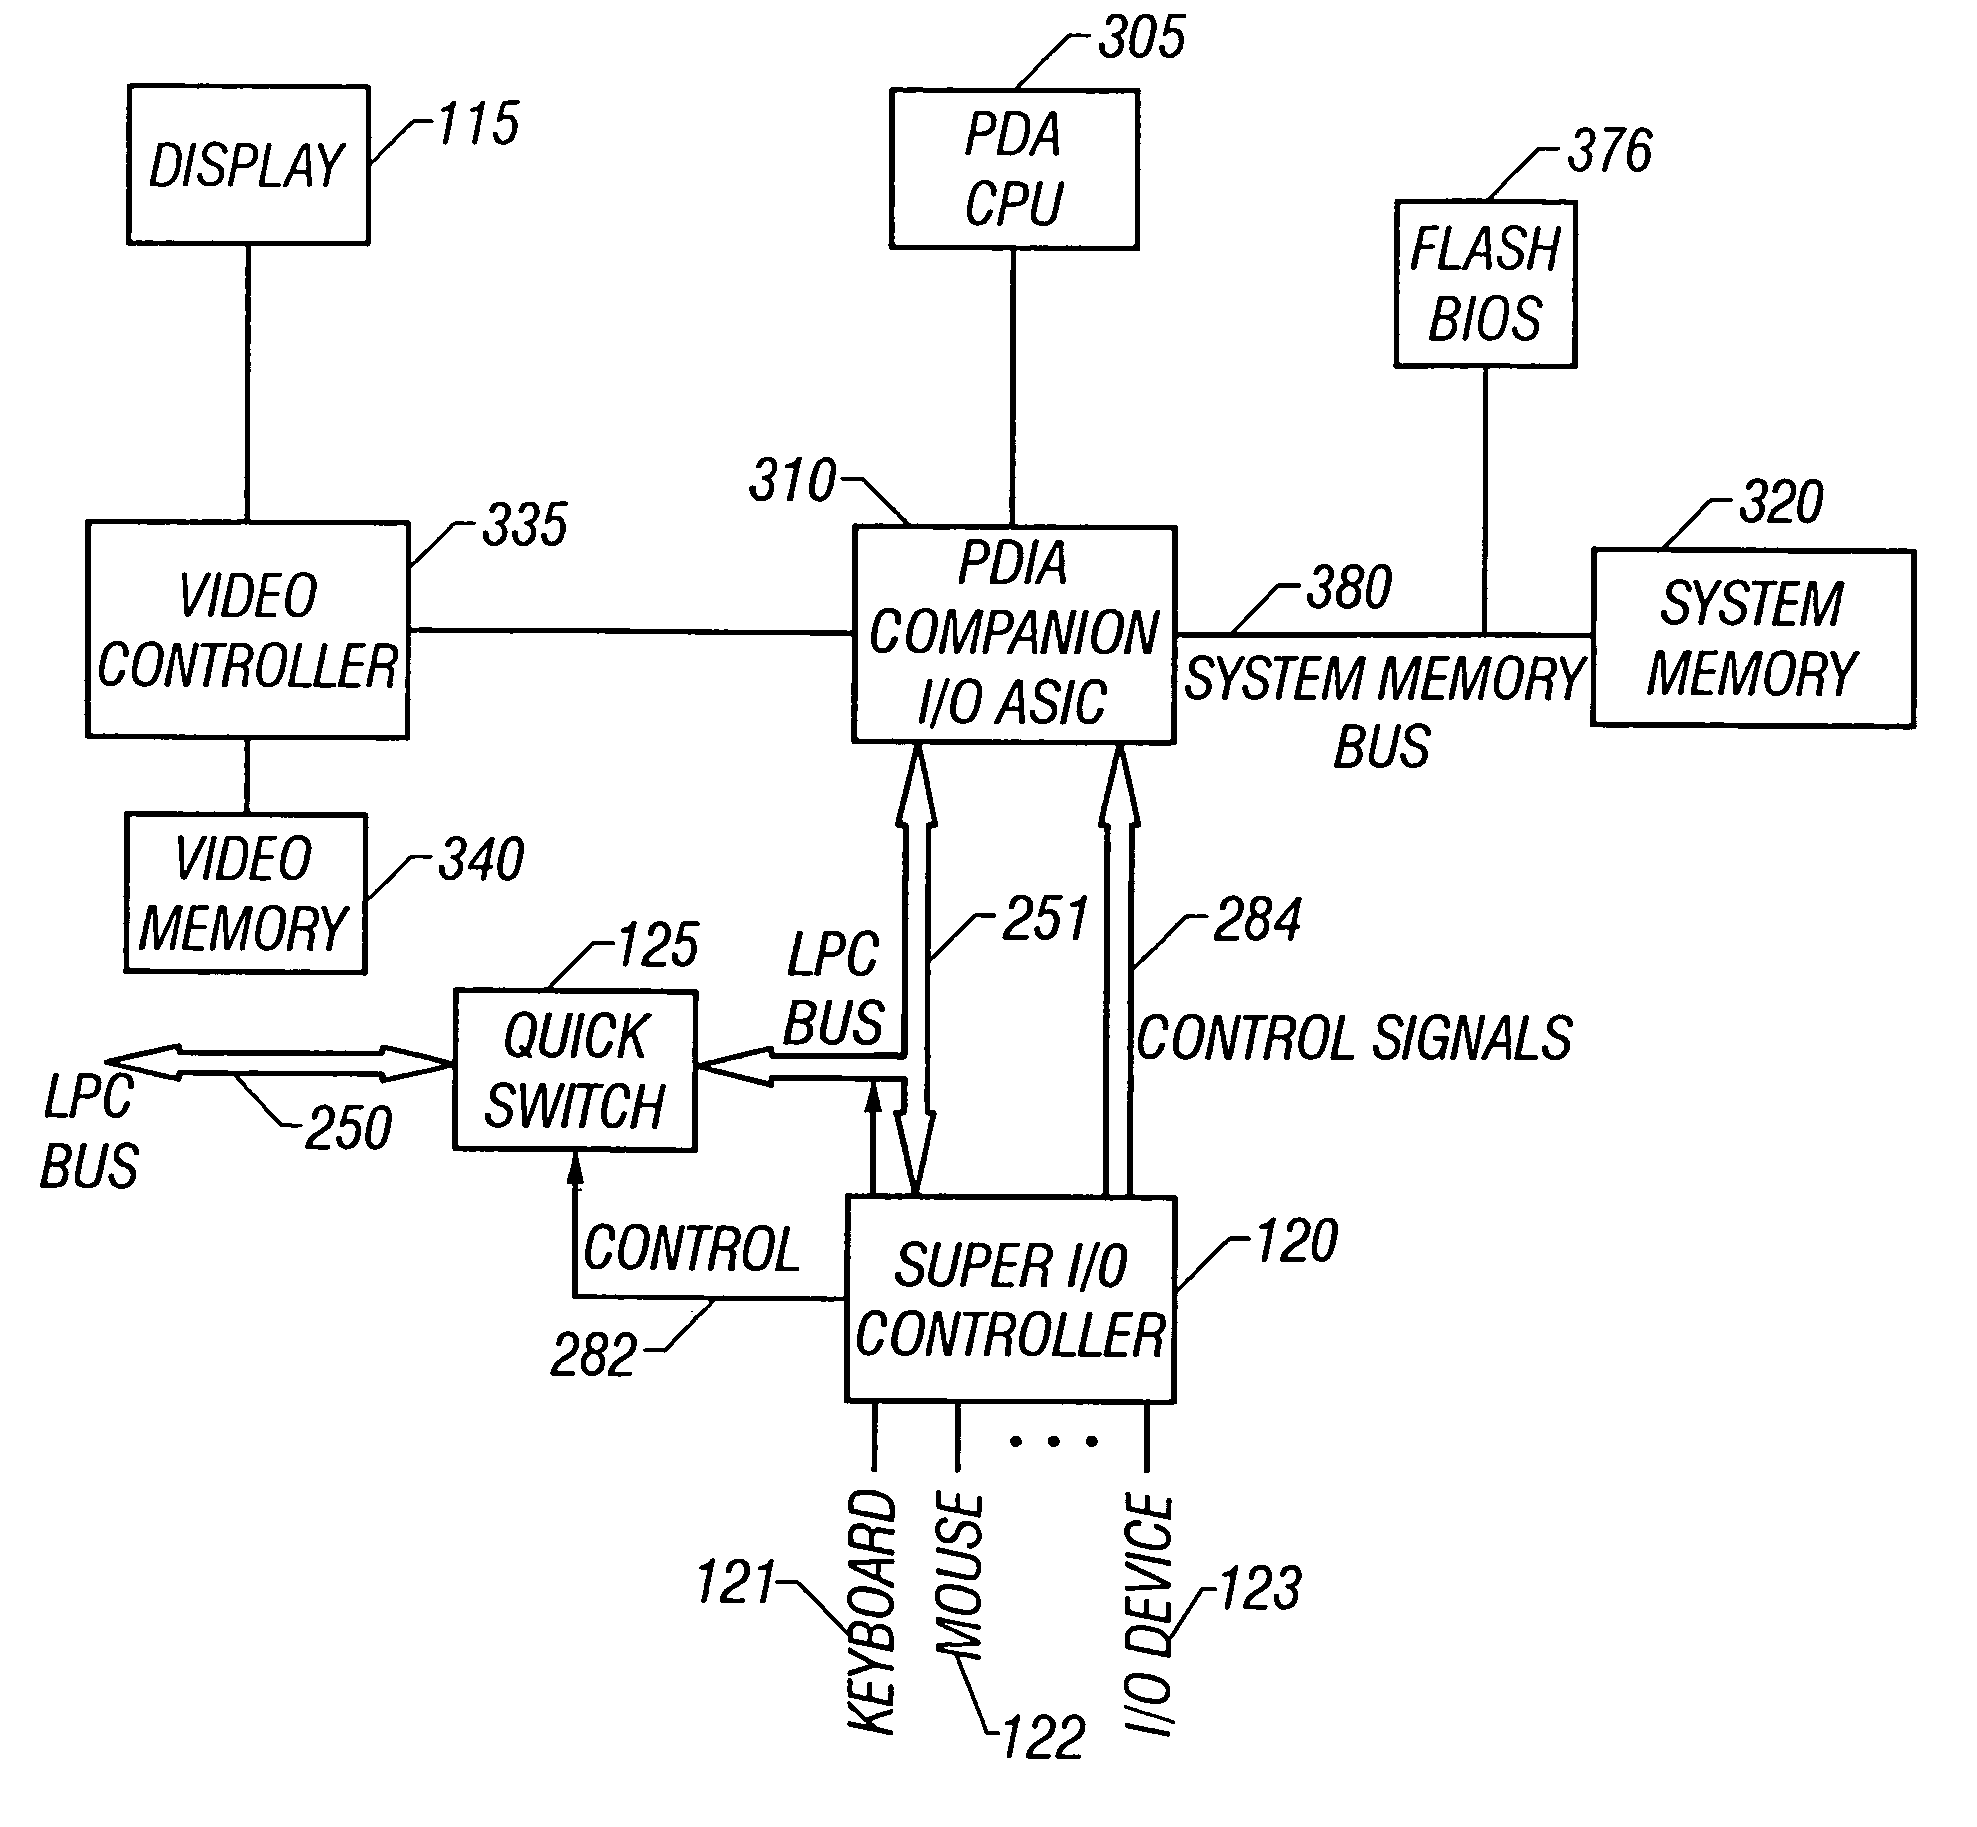 Method of operating combination personal data assistant and personal computing device